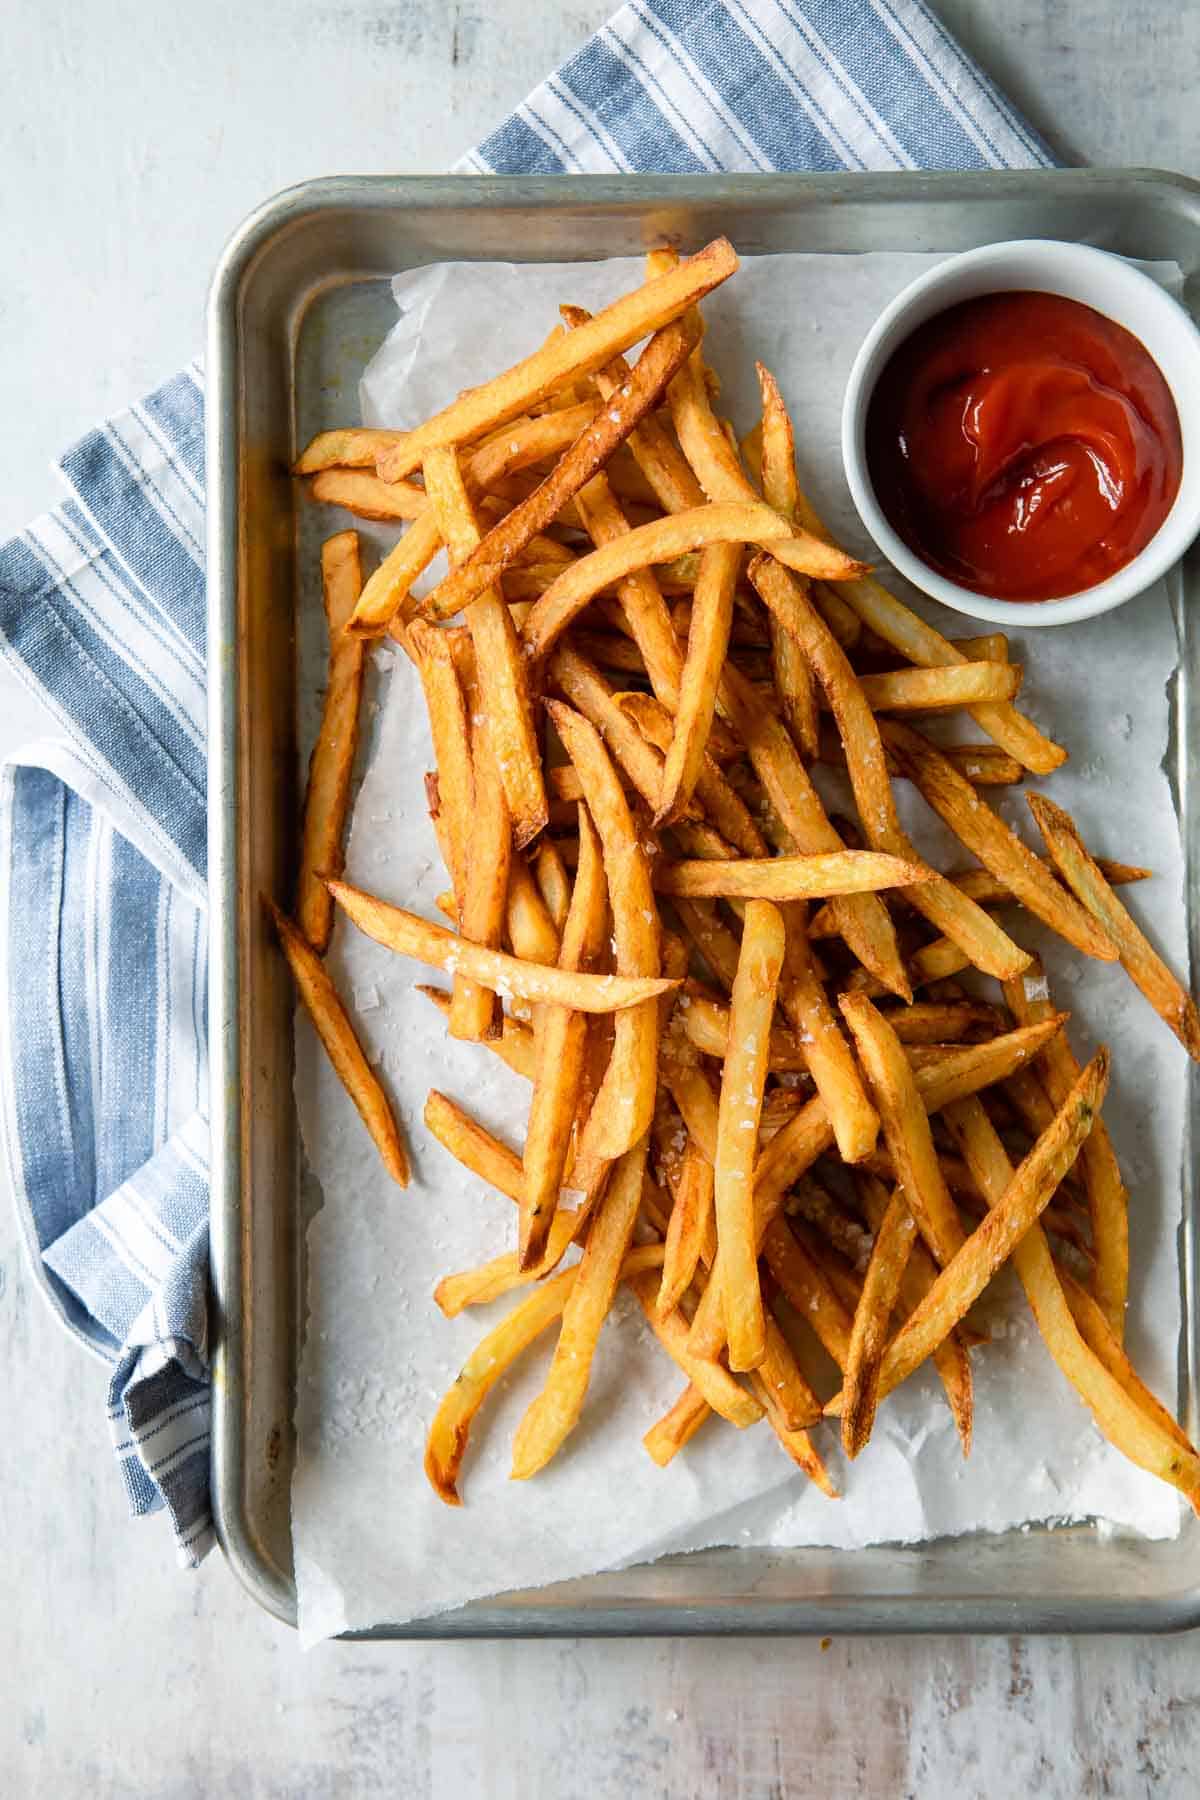 A pile of french fries on a baking sheet next to a cup of ketchup.